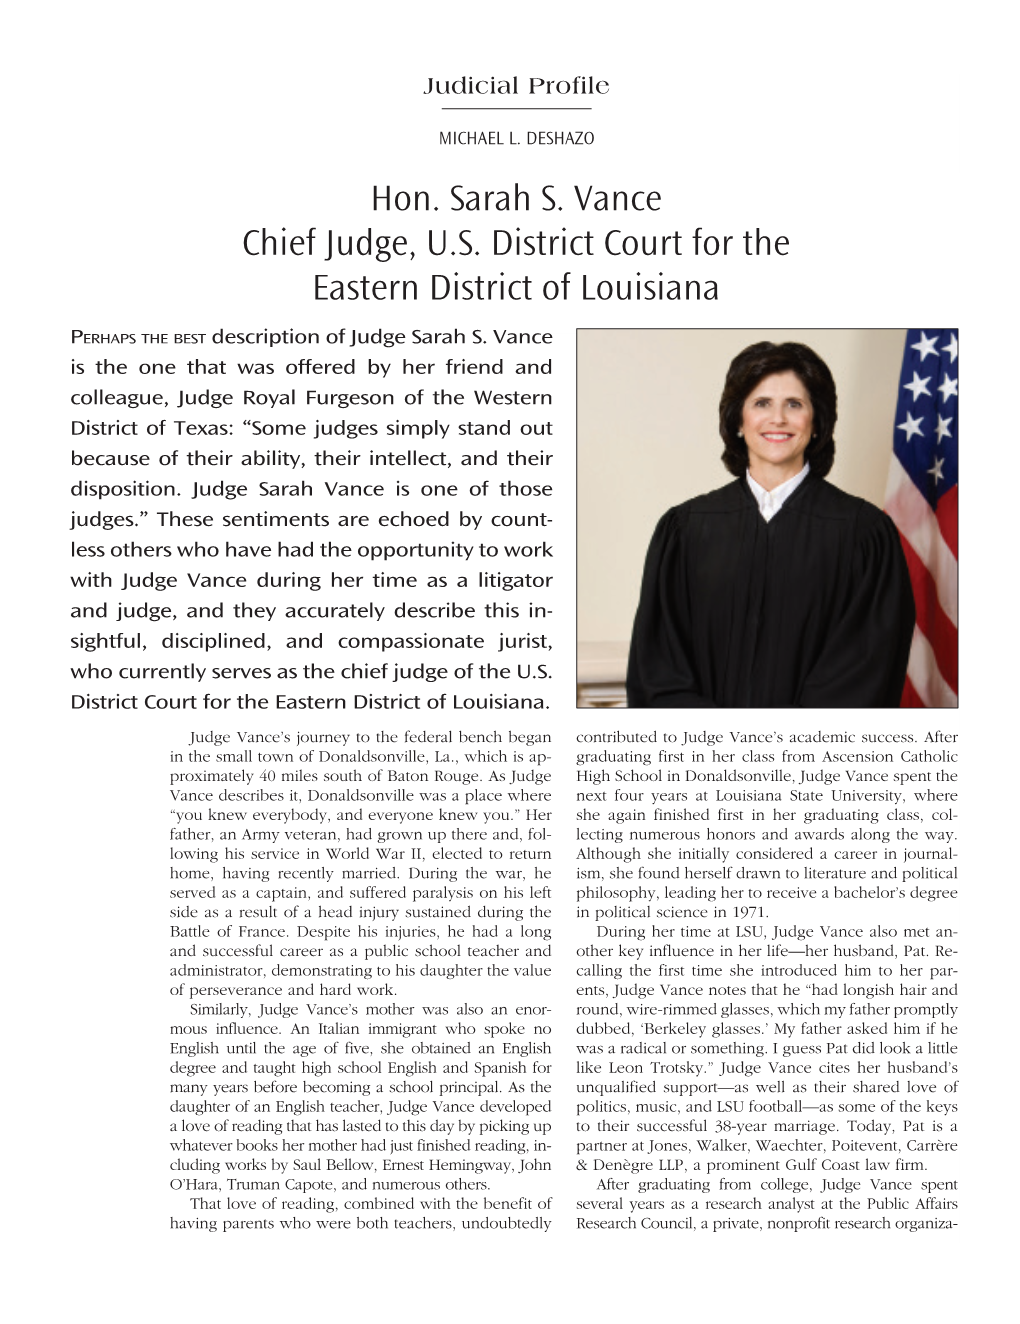 Hon. Sarah S. Vance Chief Judge, U.S. District Court for the Eastern District of Louisiana